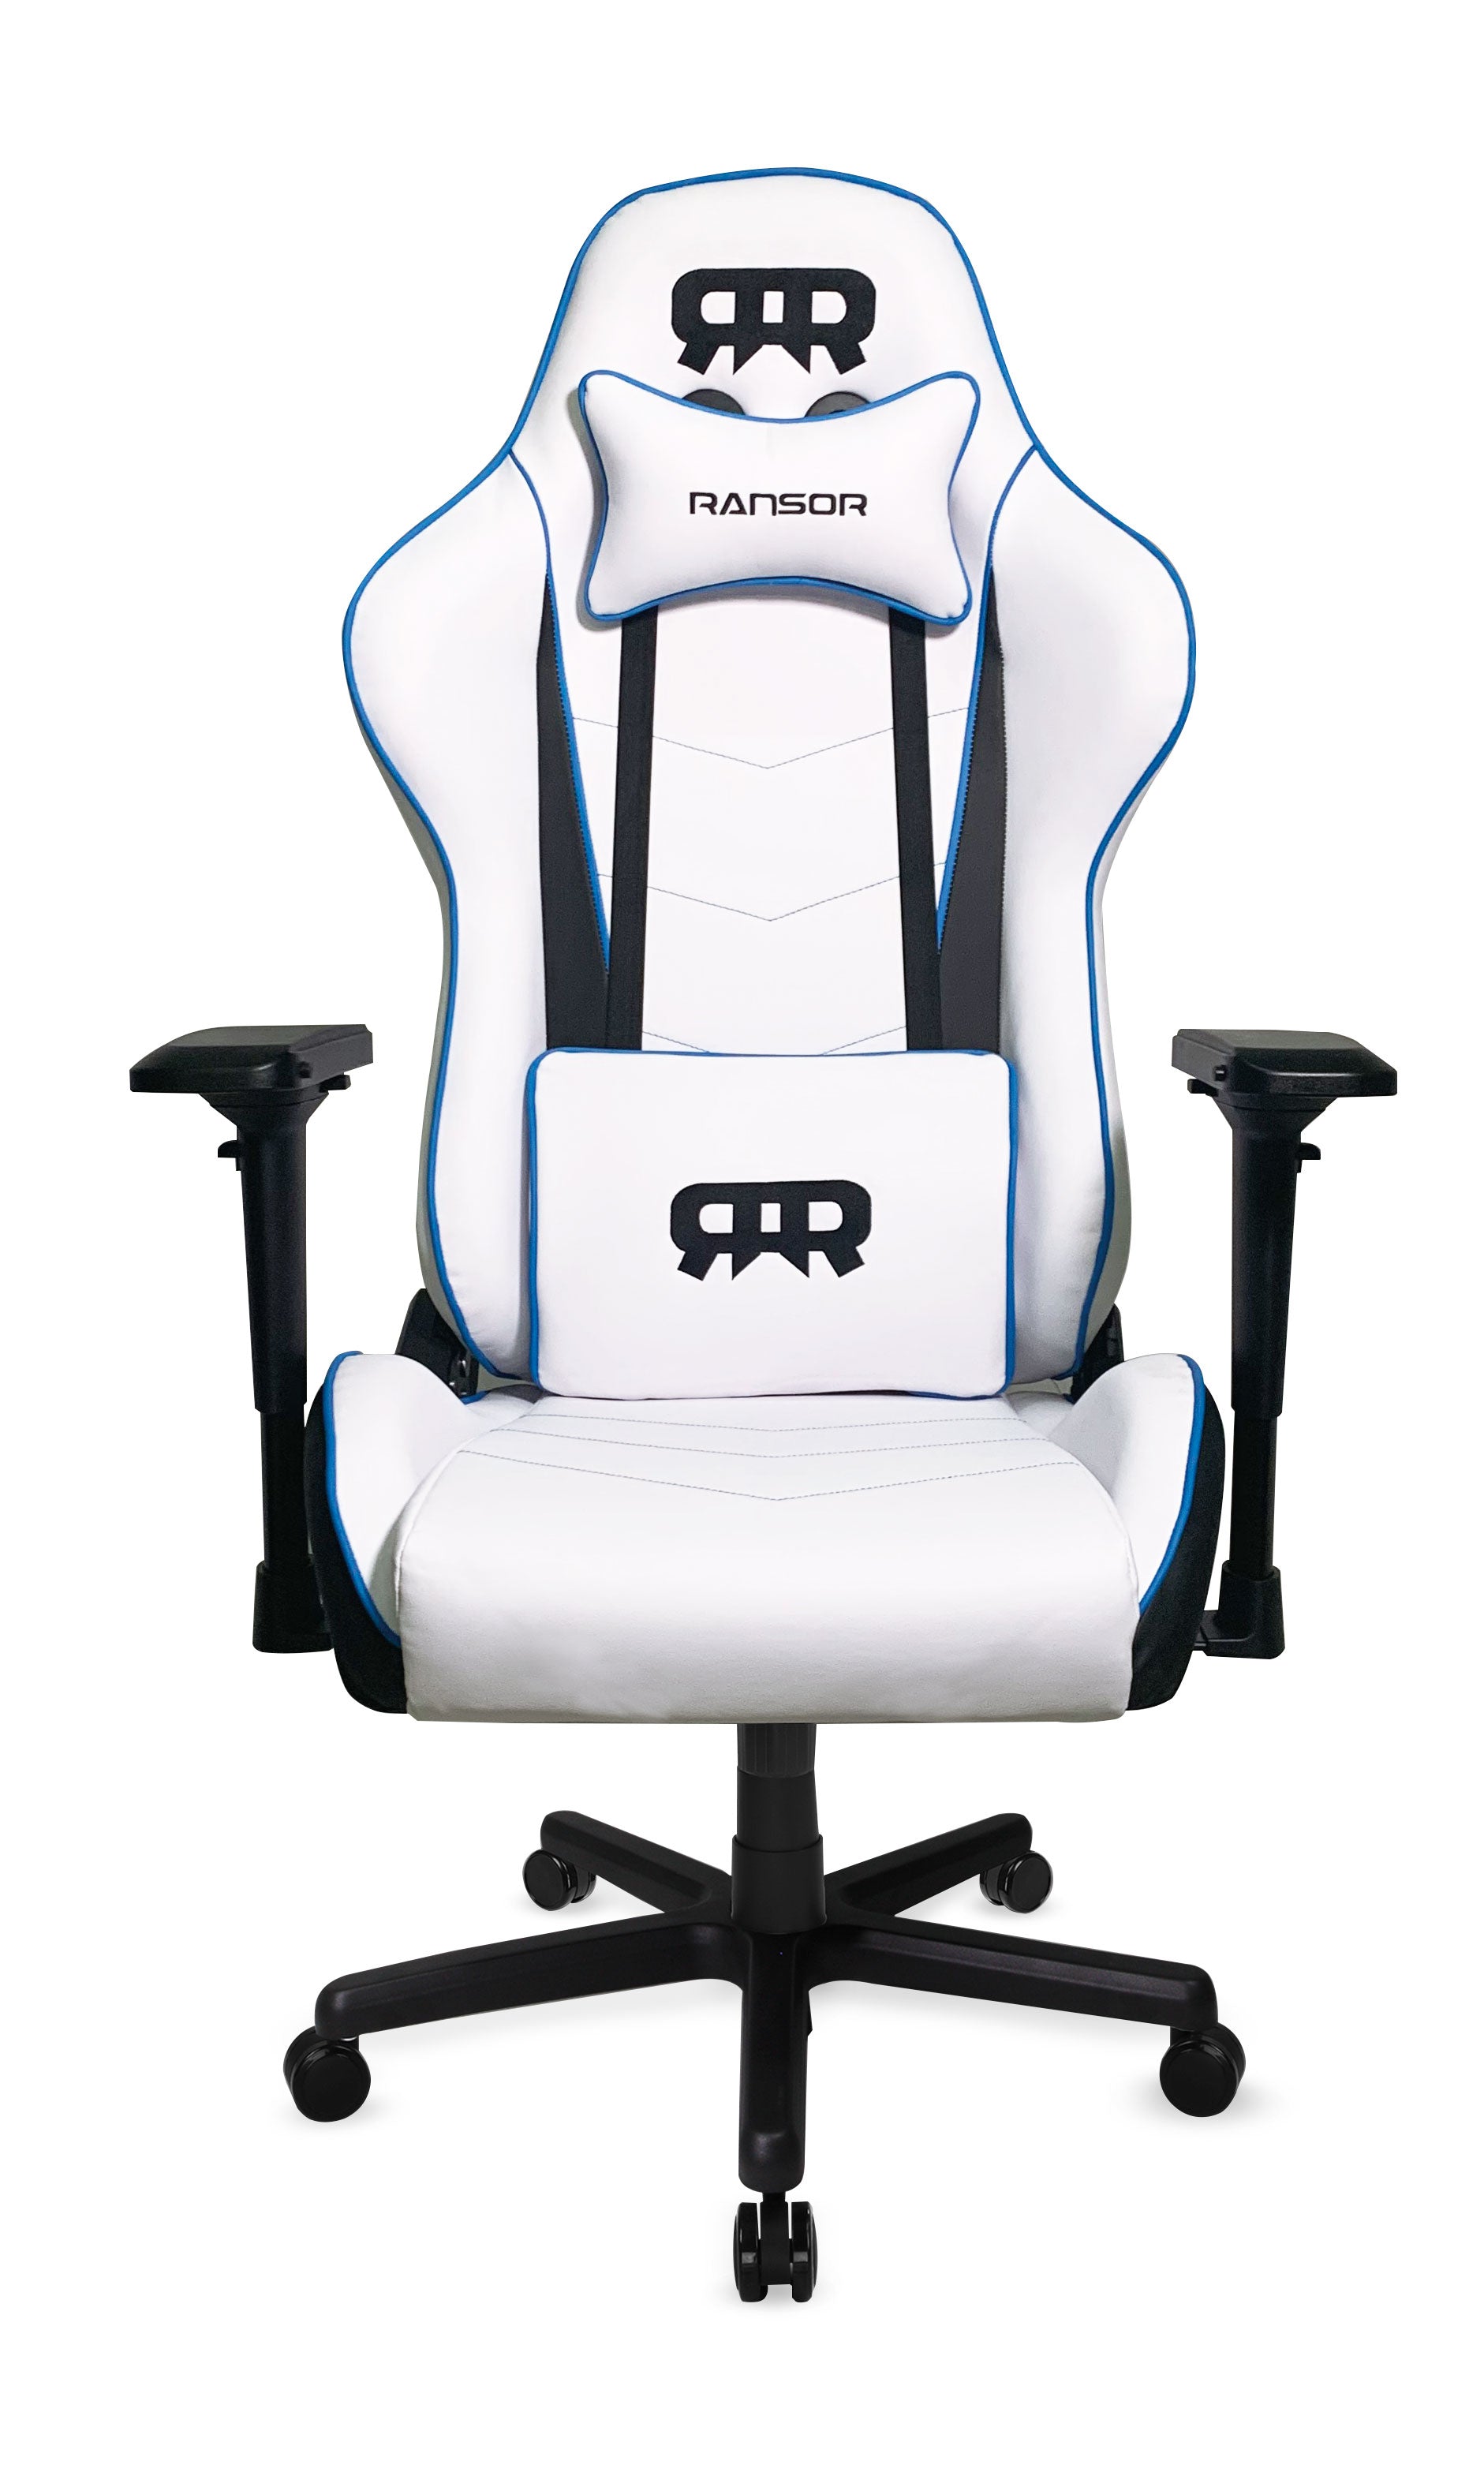 Ransor Gaming Legend Chair